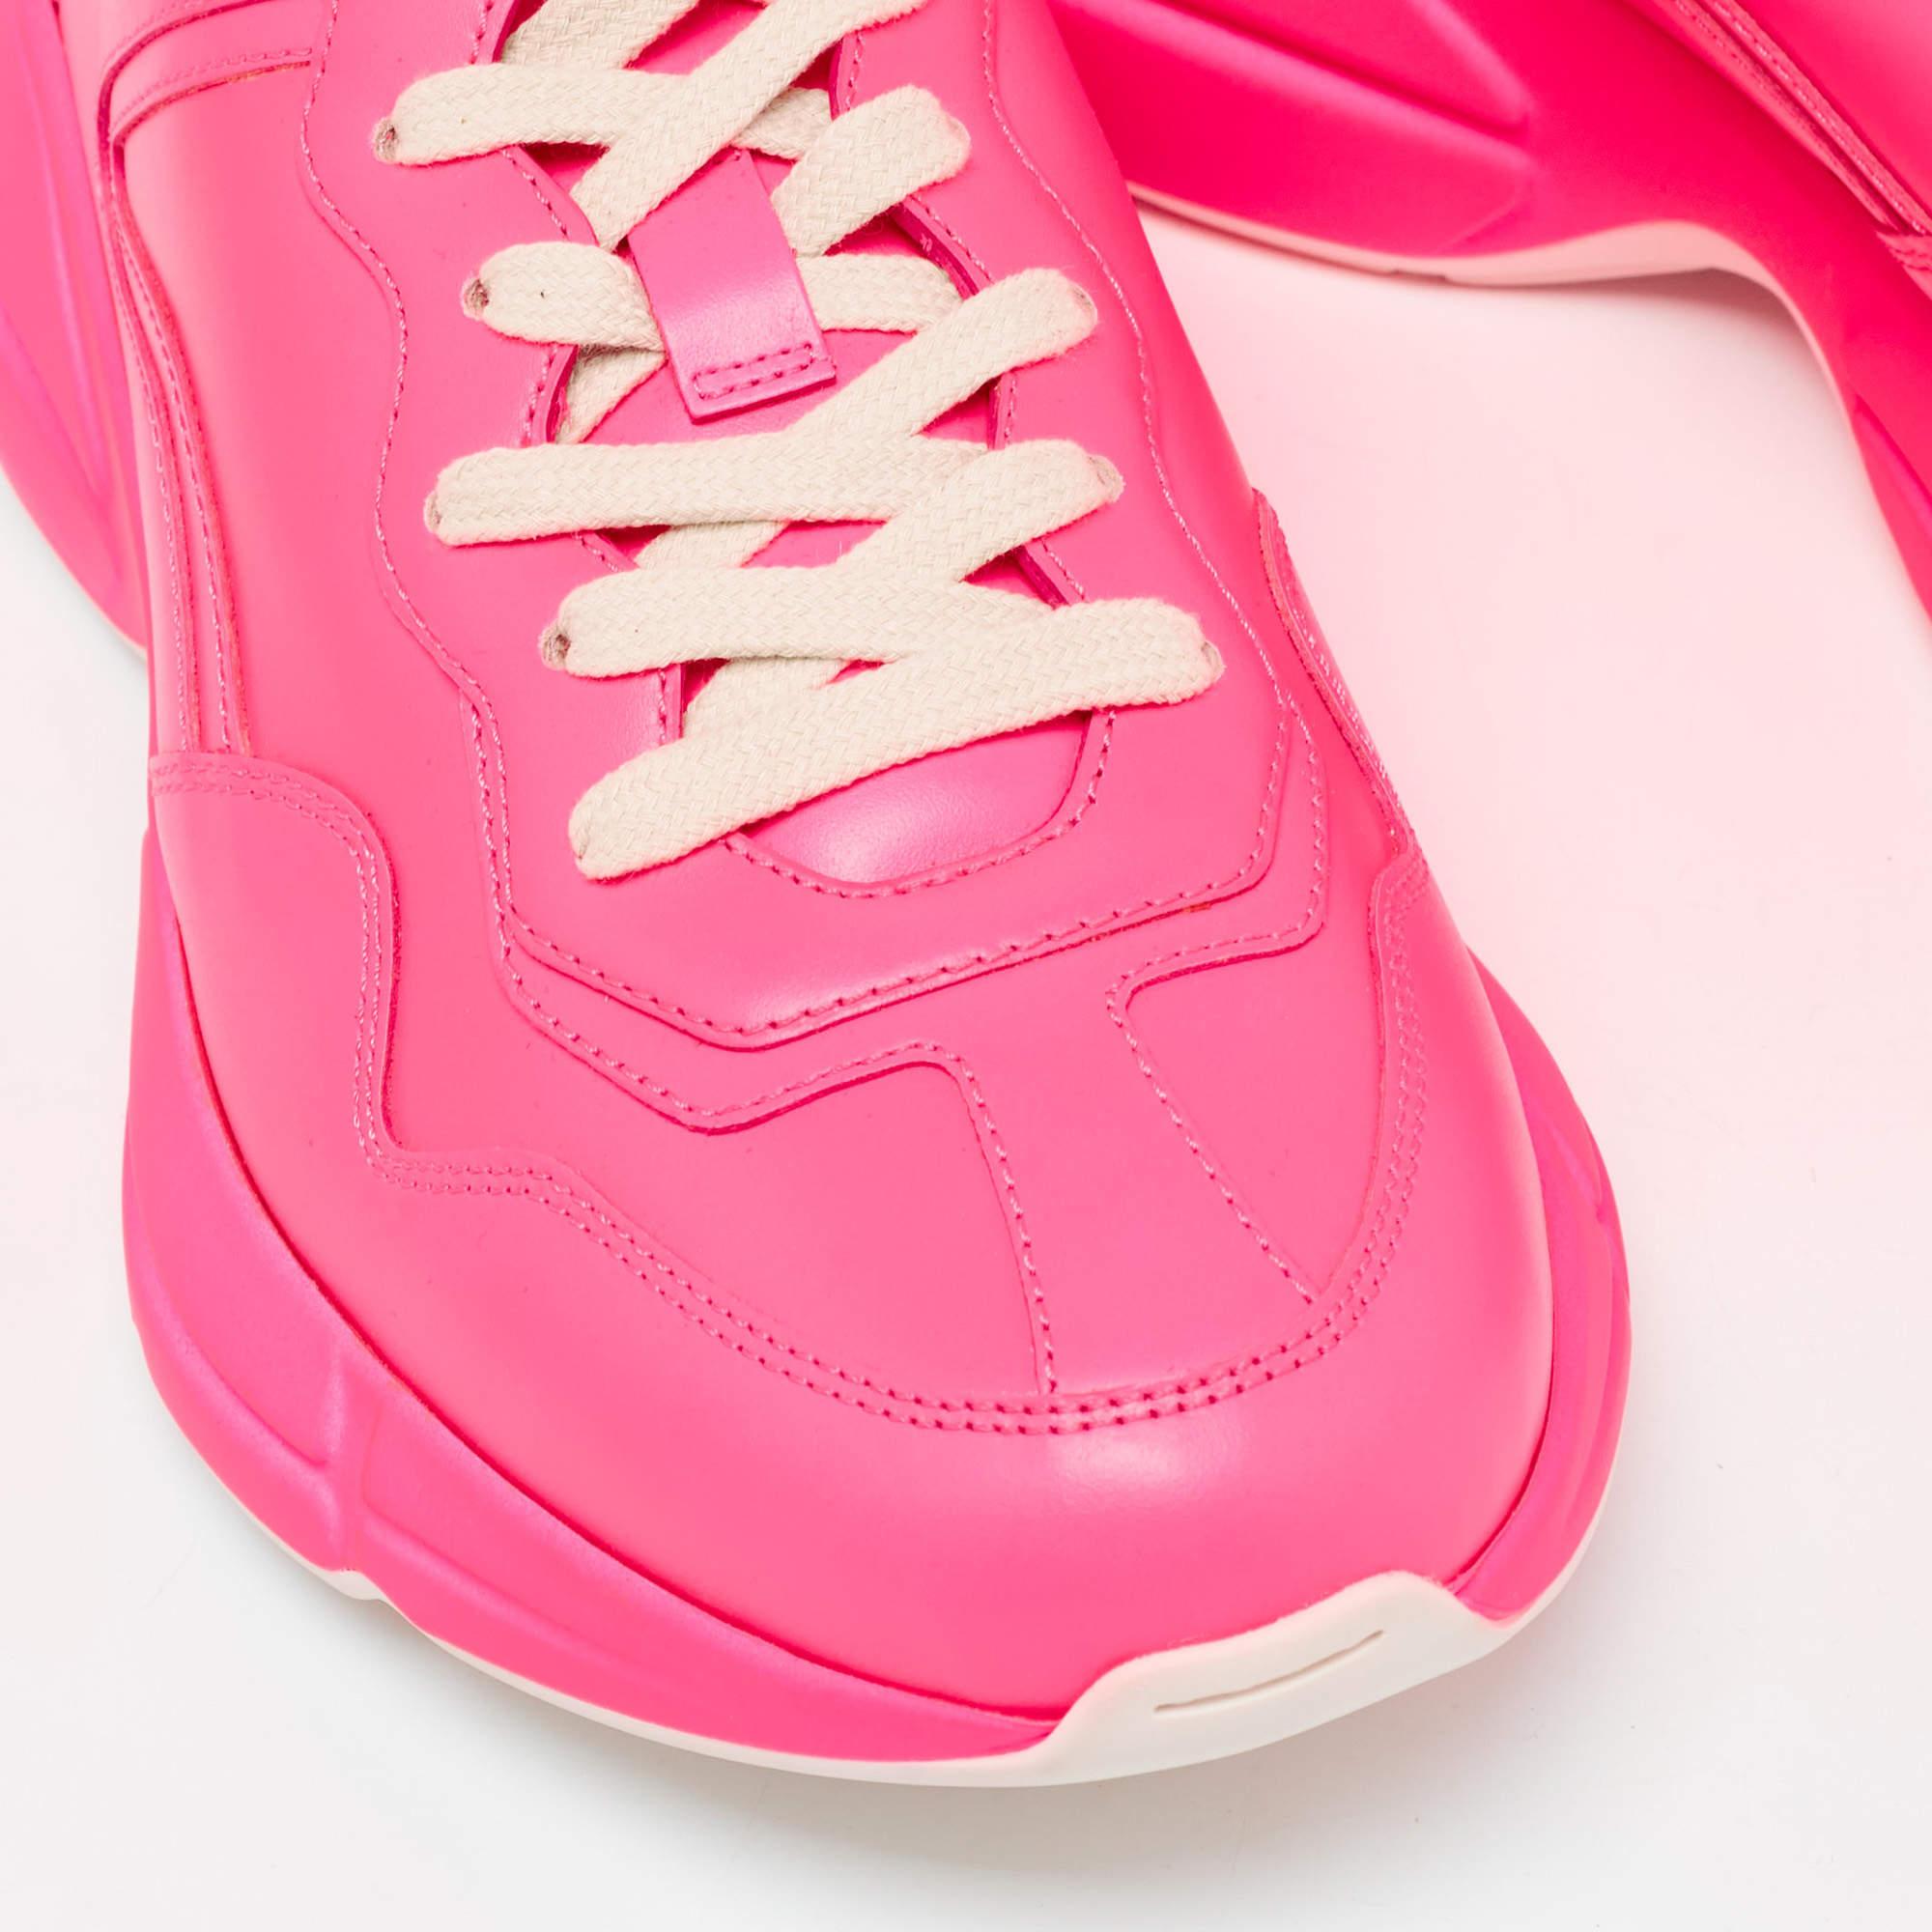 Gucci Neon Pink Leather Rhyton Sneakers Size 39 2